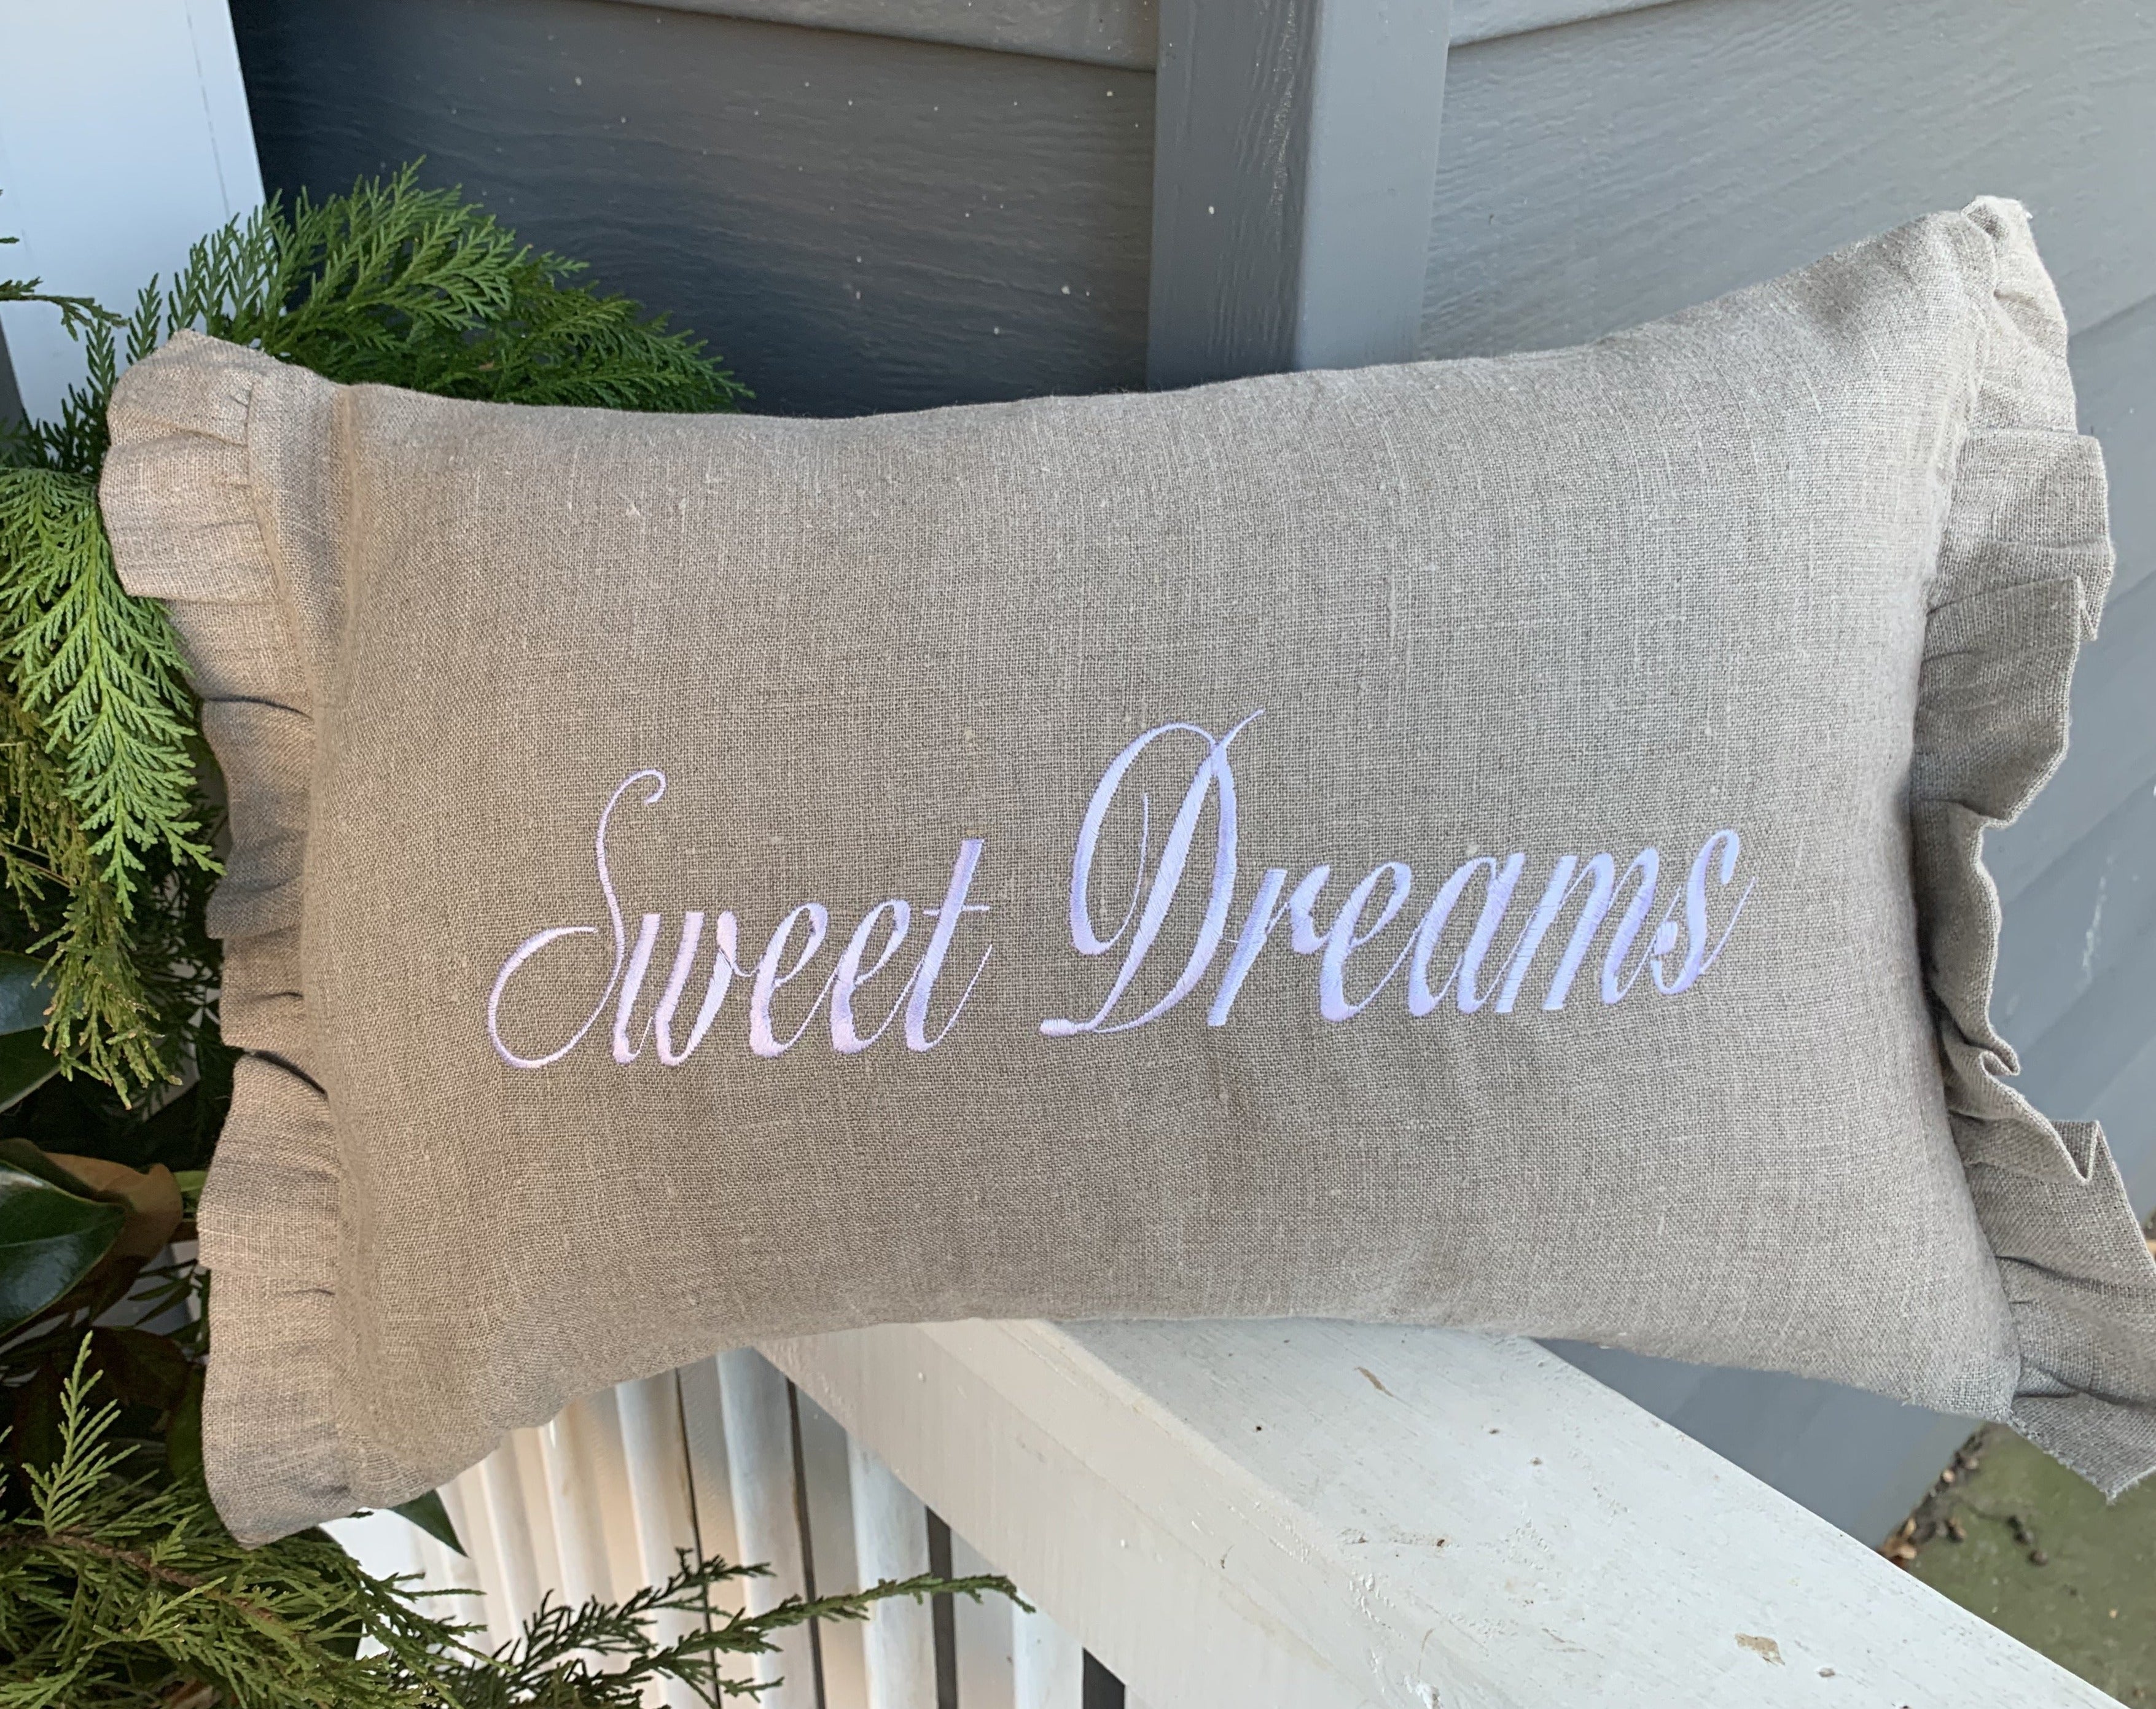 Embroidered Sweet Dreams Pillow - Tan pillow with white script